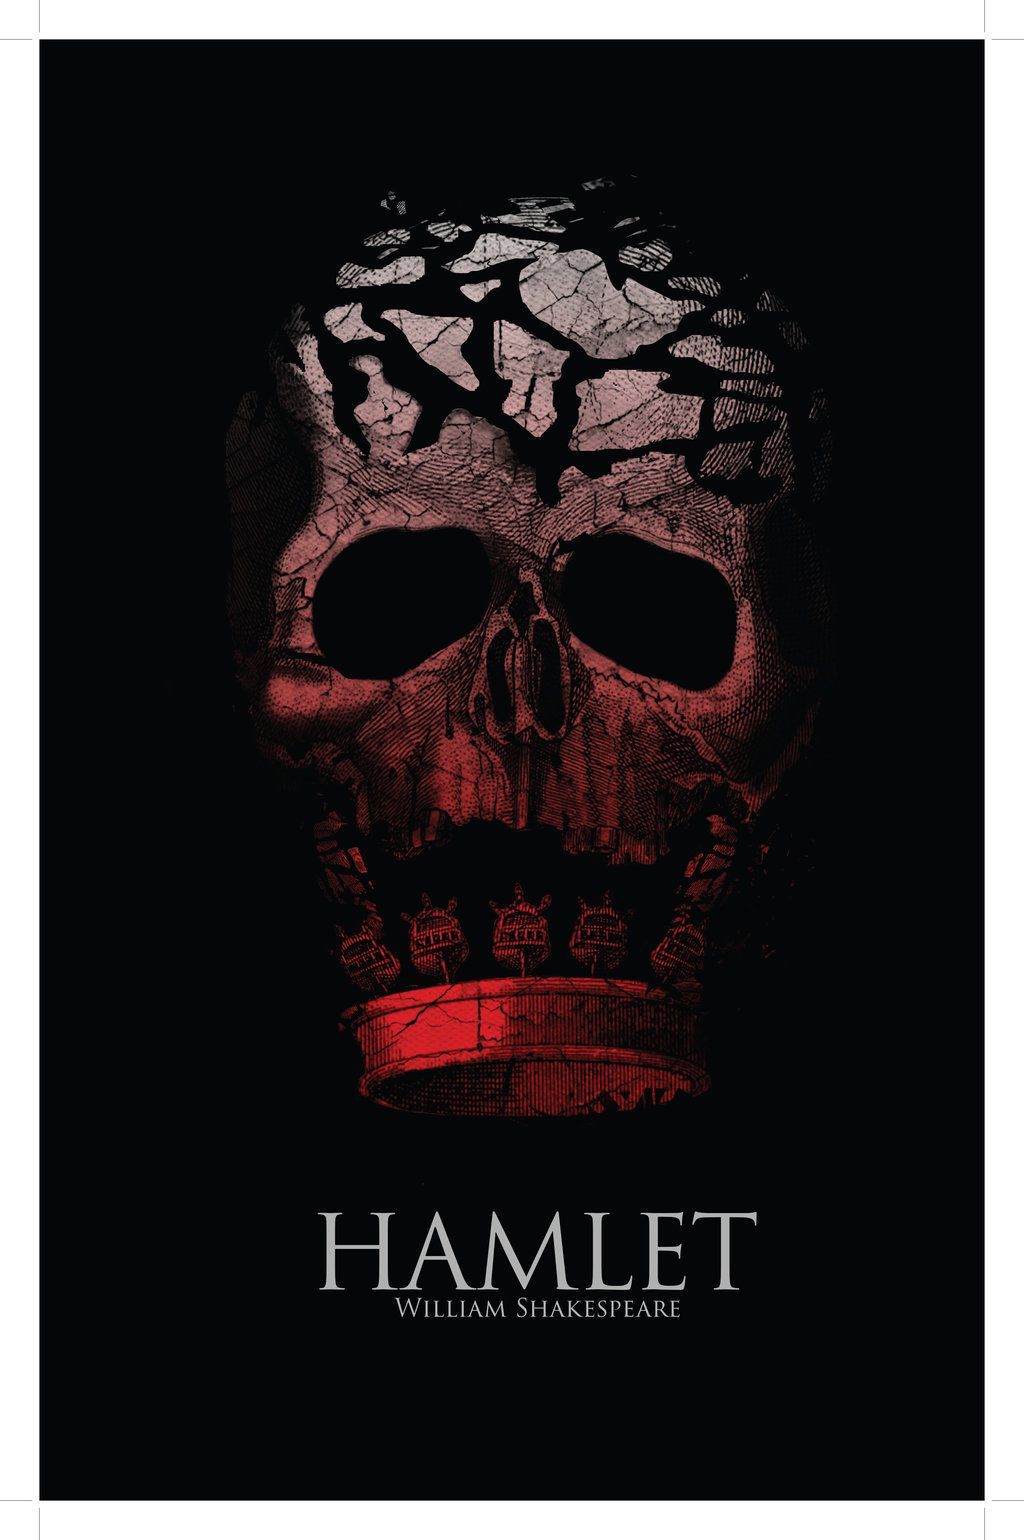 The well known story of Hamlet was the main theme of this project